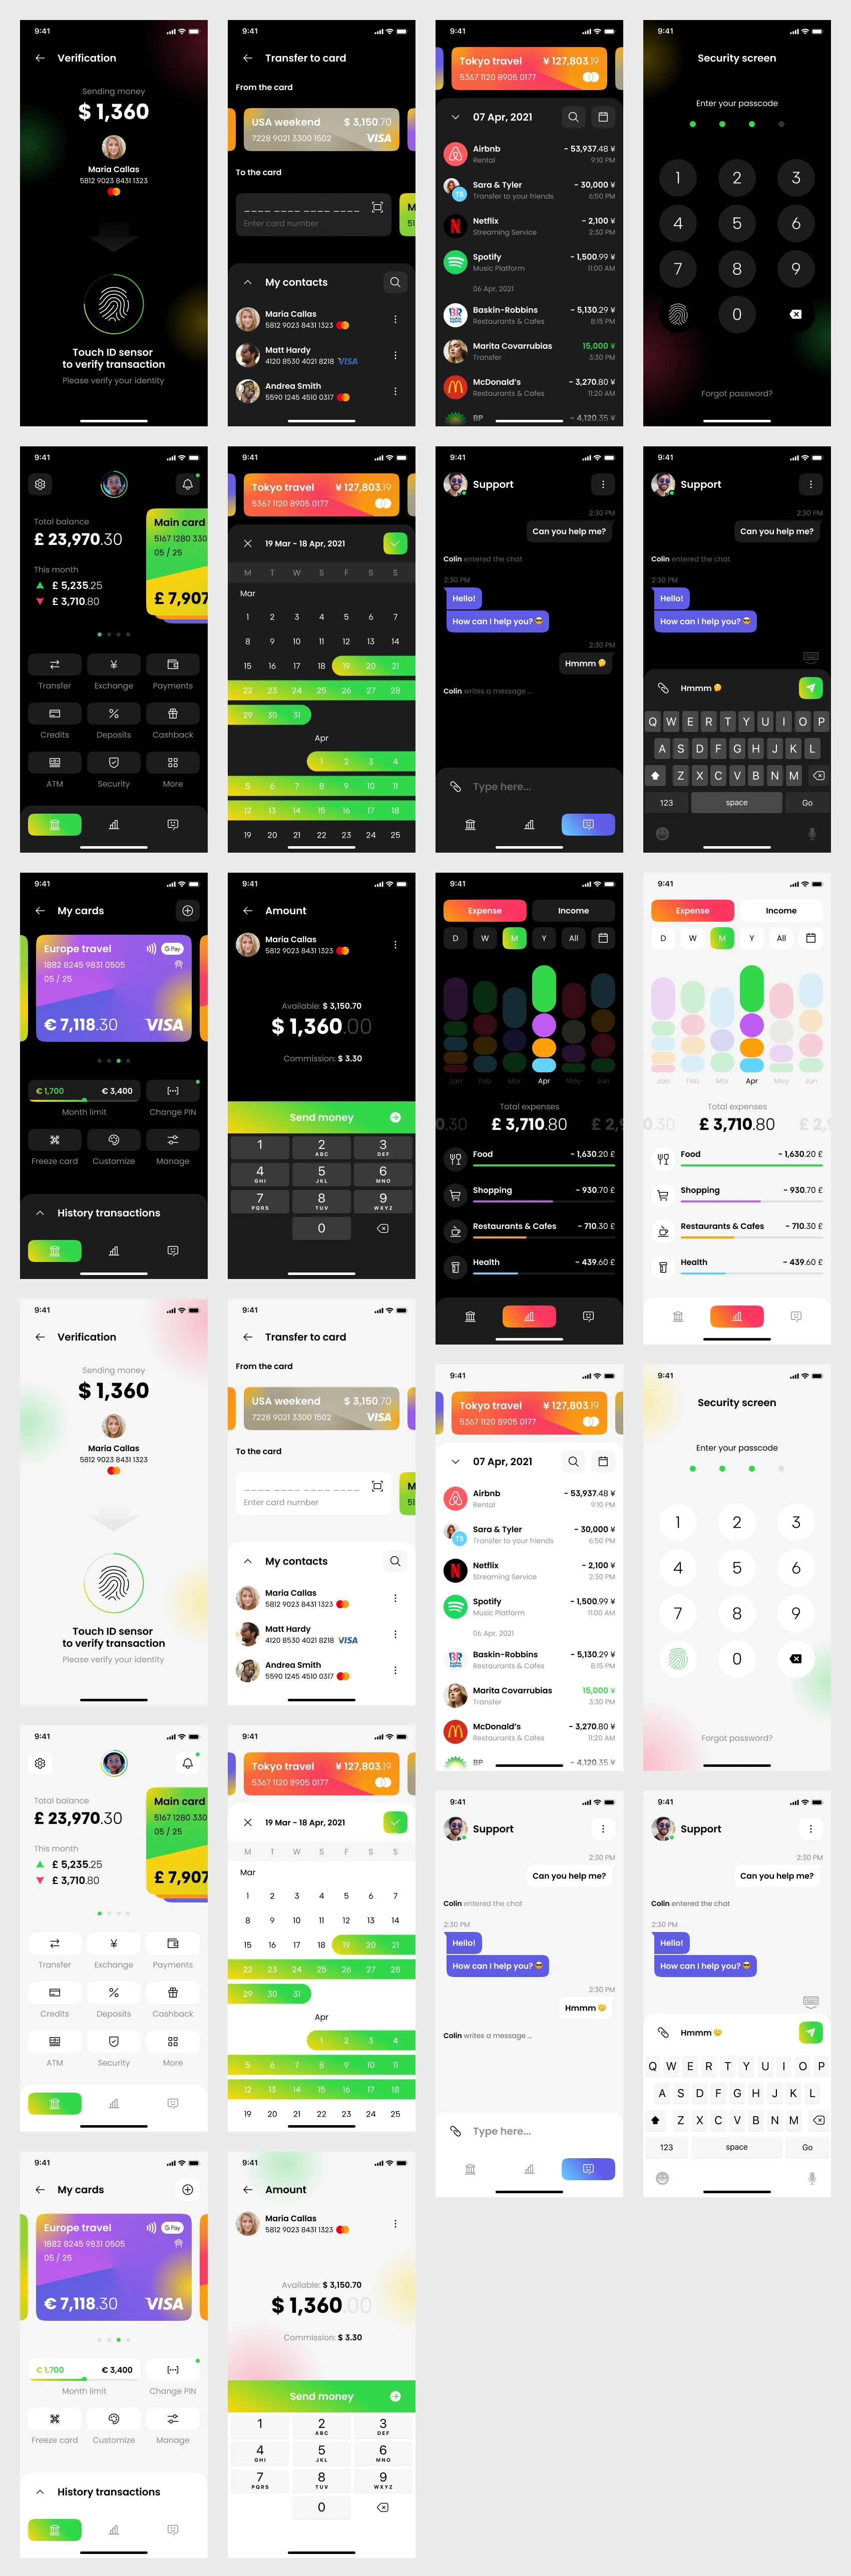 Banking App Free UI Kit for Figma - Clean and clear UI Kit with necessary stuff to create design projects. It features 22 mobile screen pages to get you started on your projects.